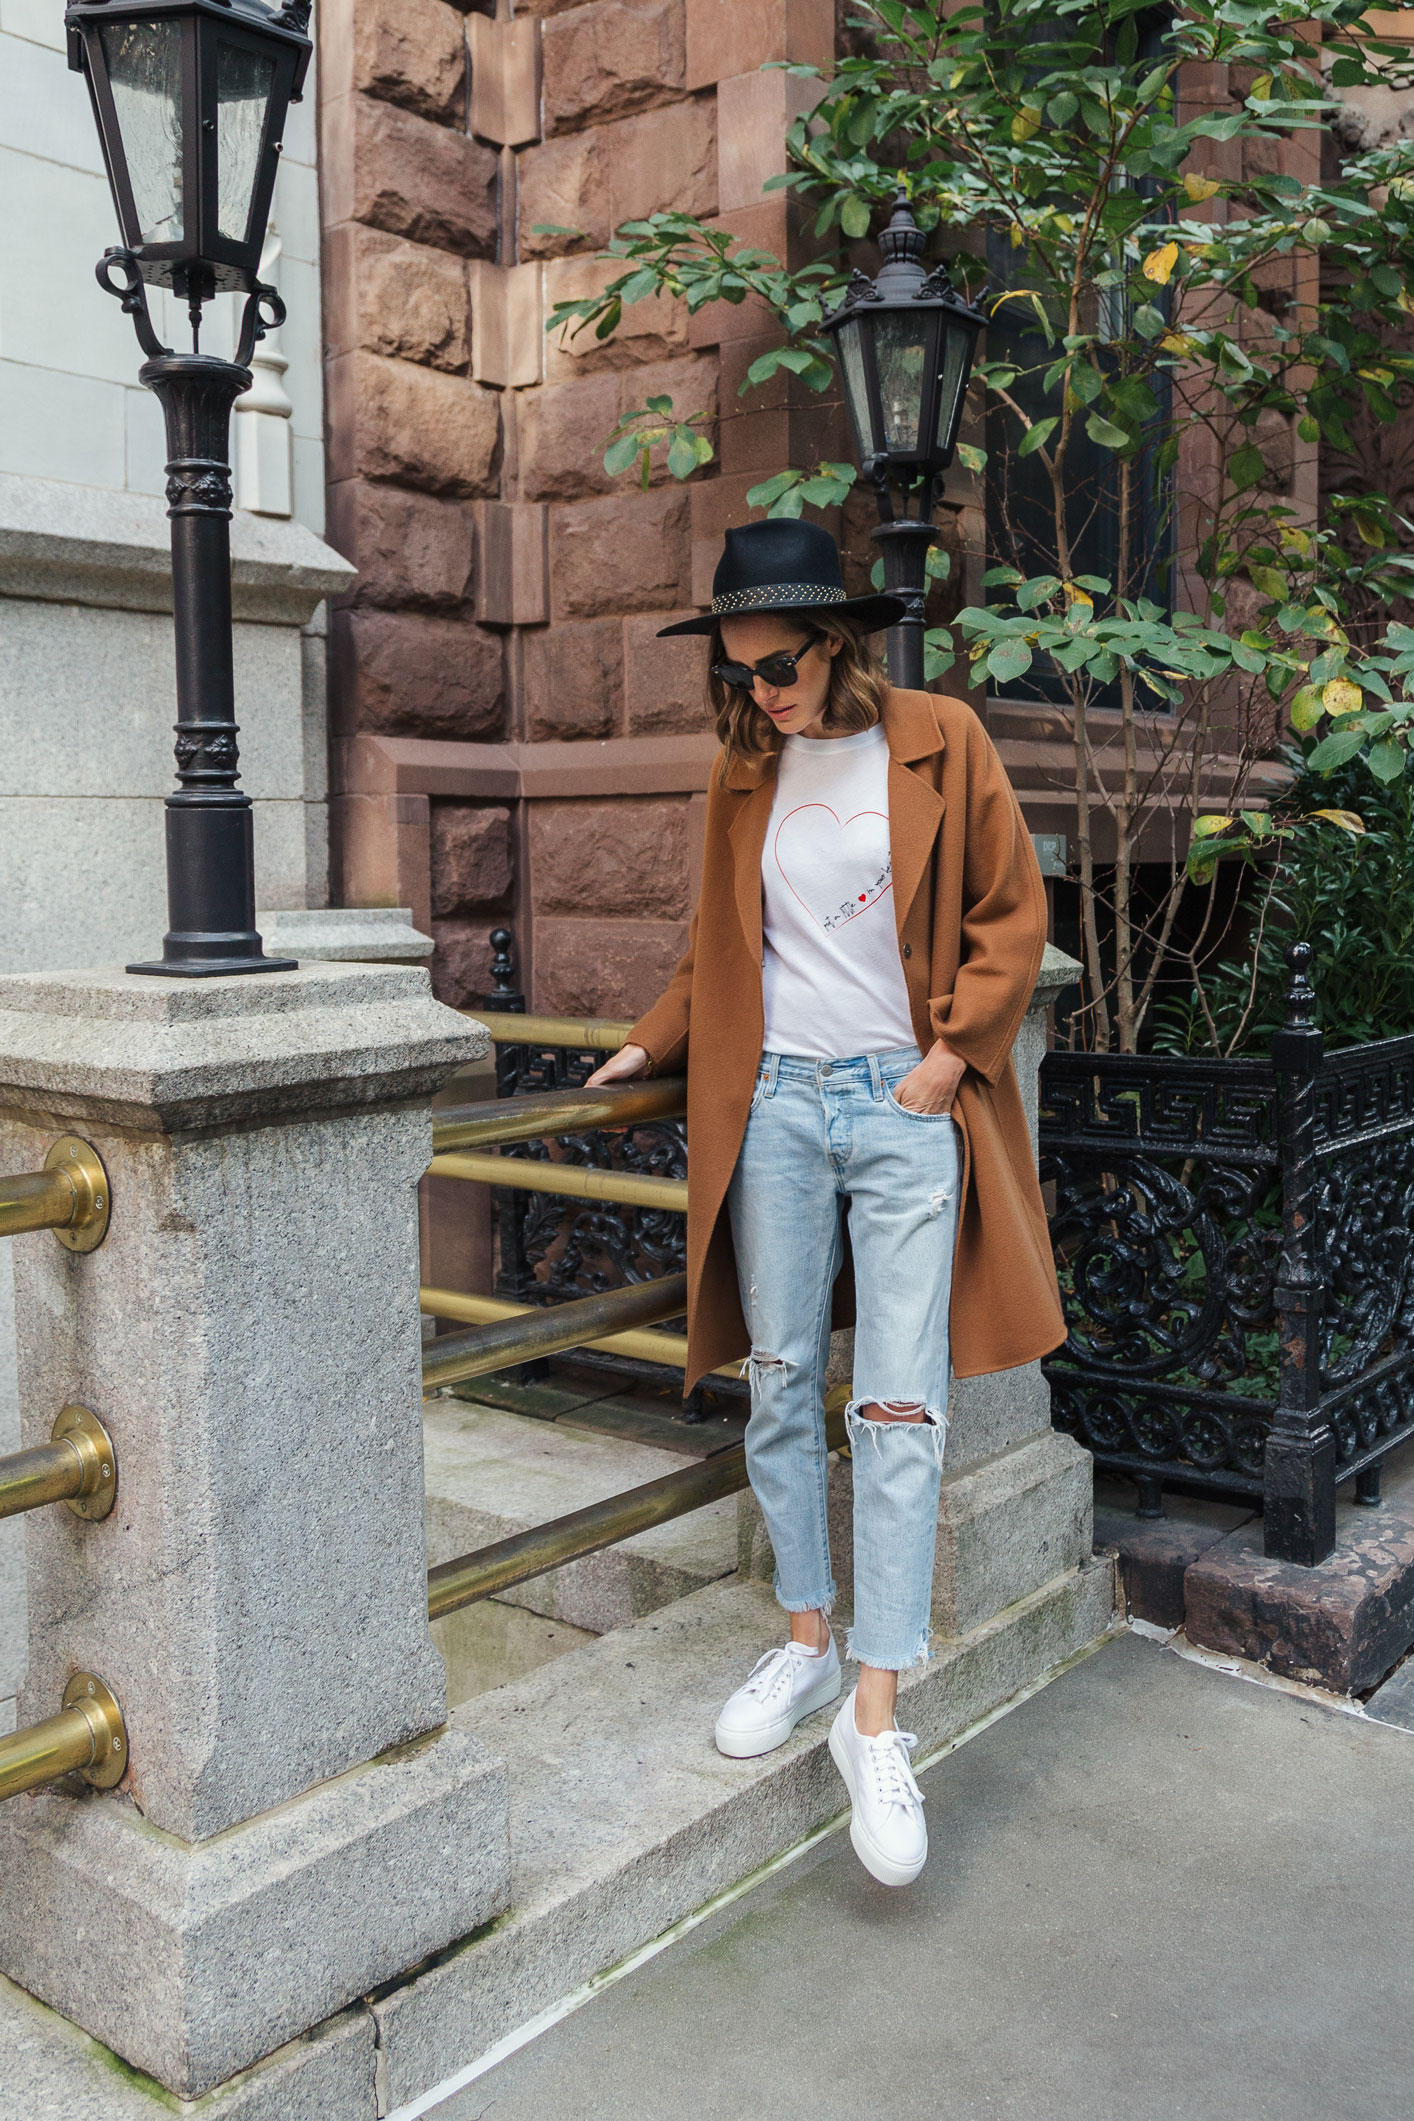 Louise Roe wearing Gerard Darel camel coat boyfriend jeans and superga sneakers in NYC